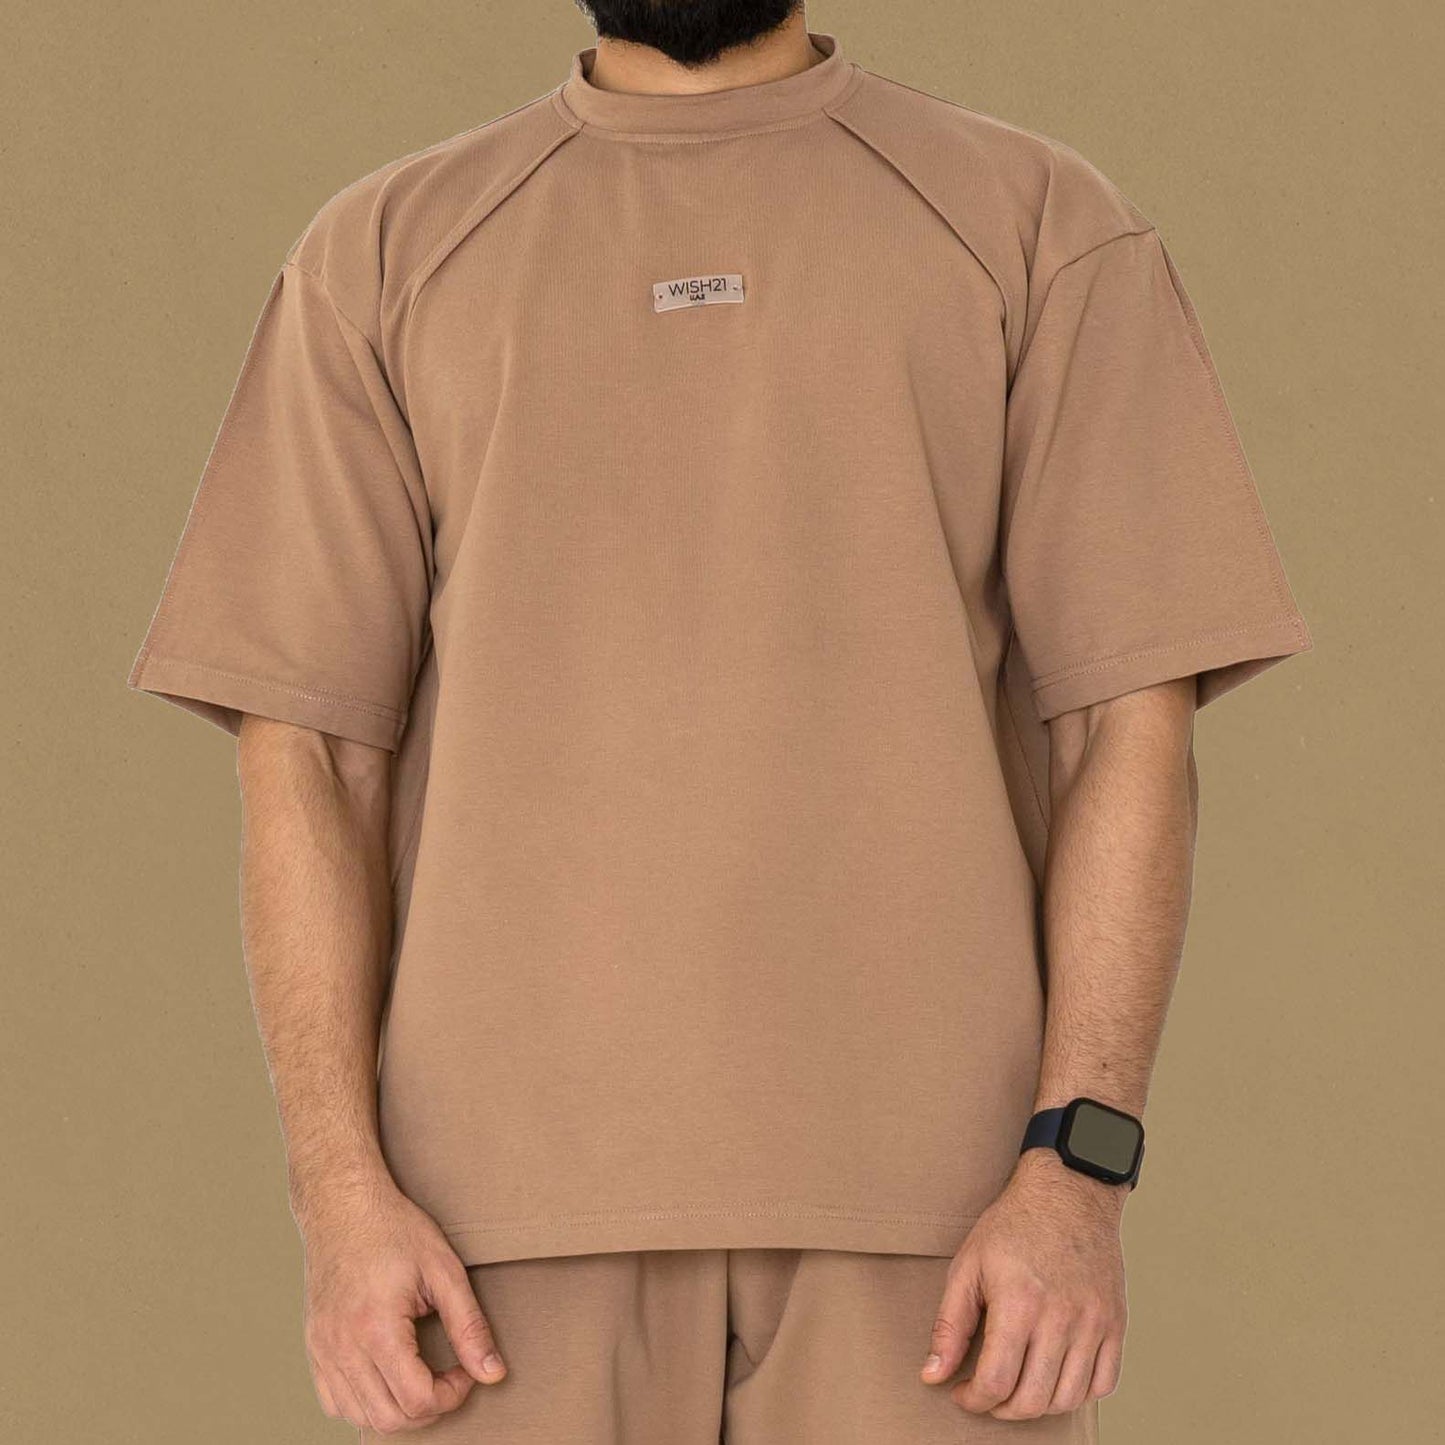 OVERSIZED T-SHIRT , BRAND NAME ENGRAVED ON PLASTIC IN THECHEST